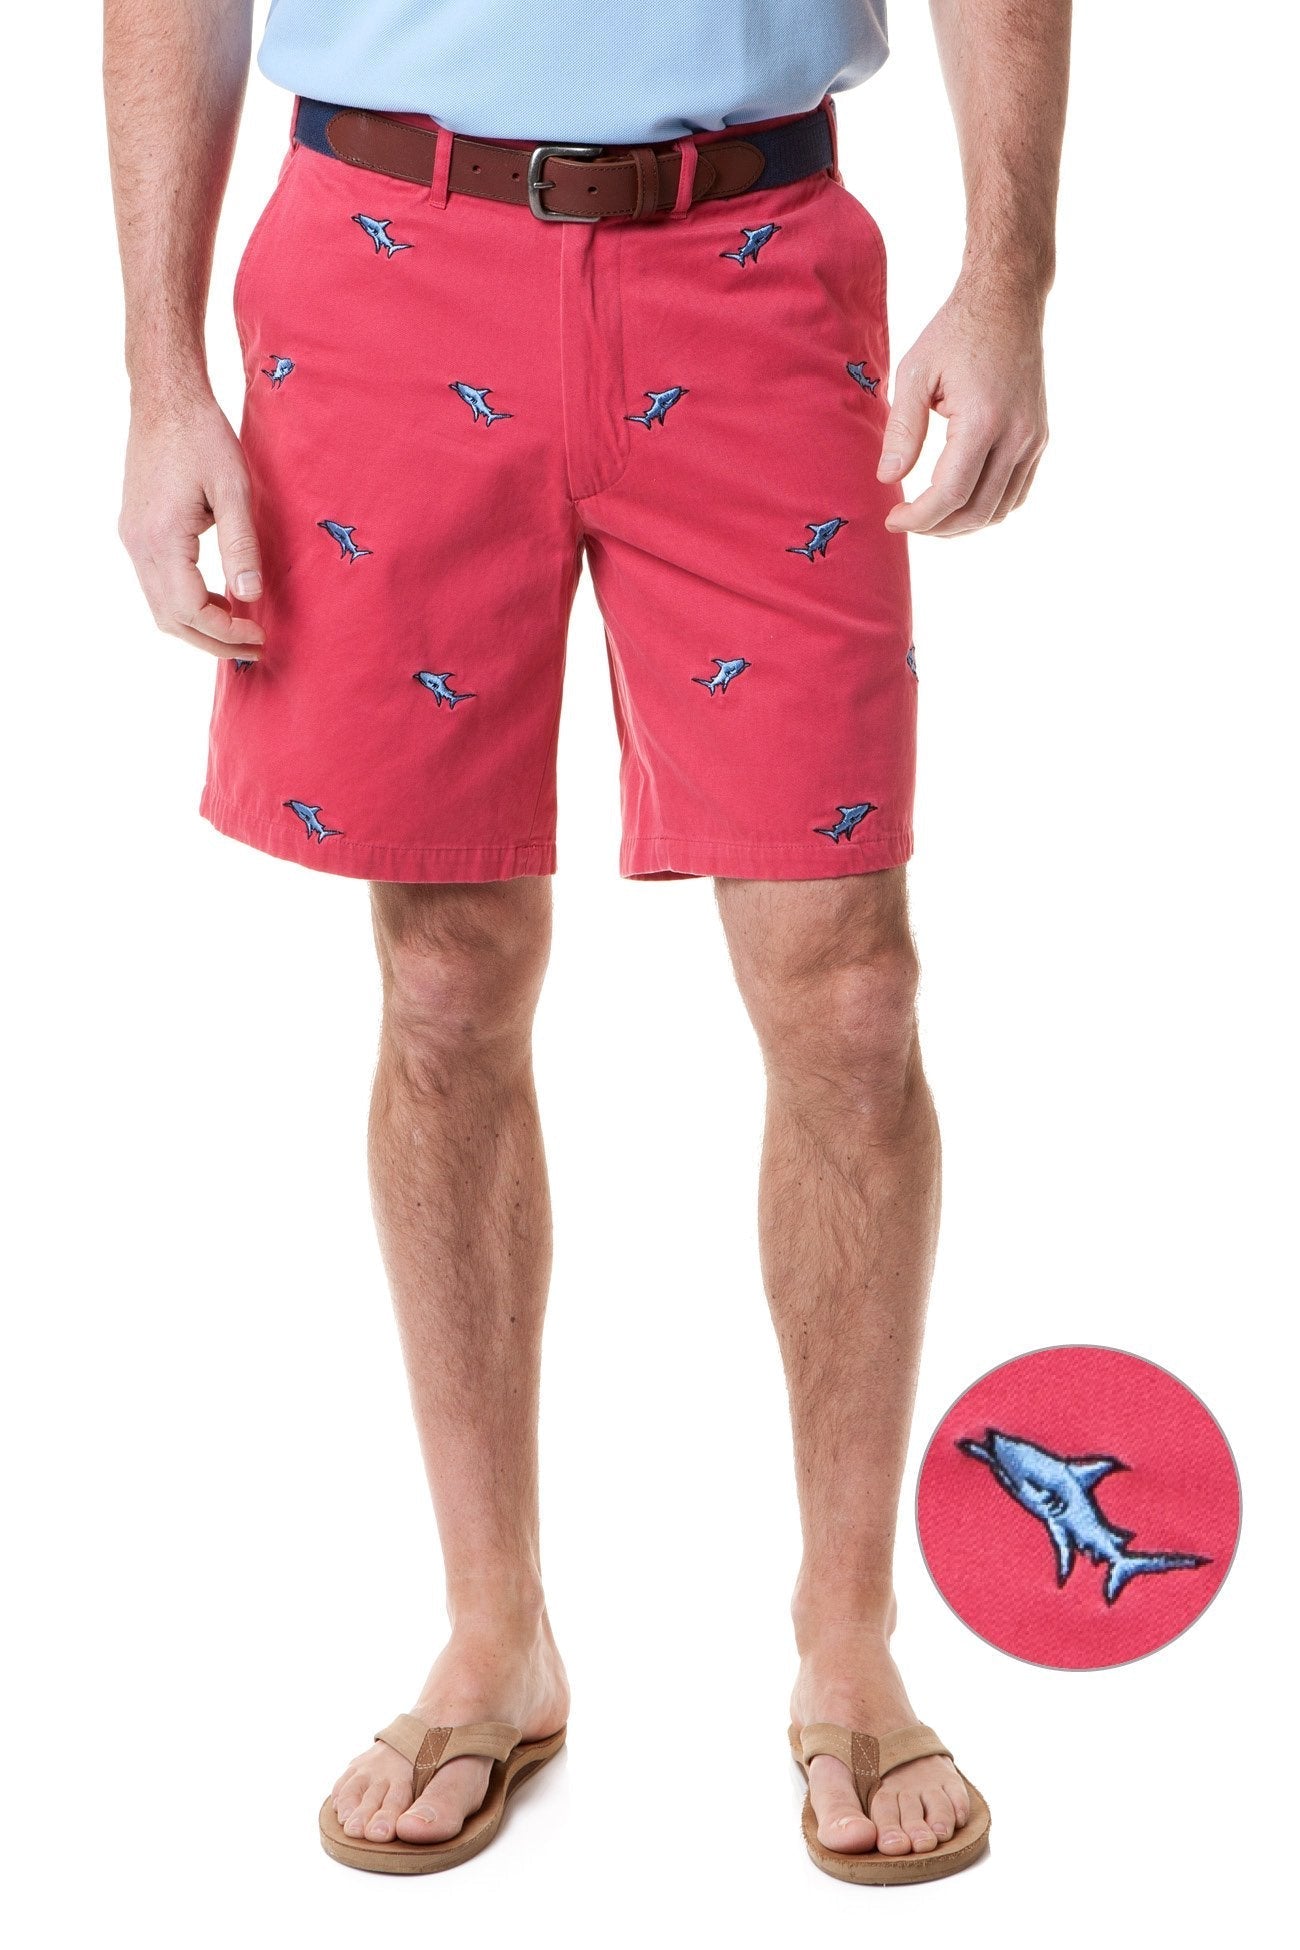 Cisco Short Stretch Twill Hurricane Red with Shark